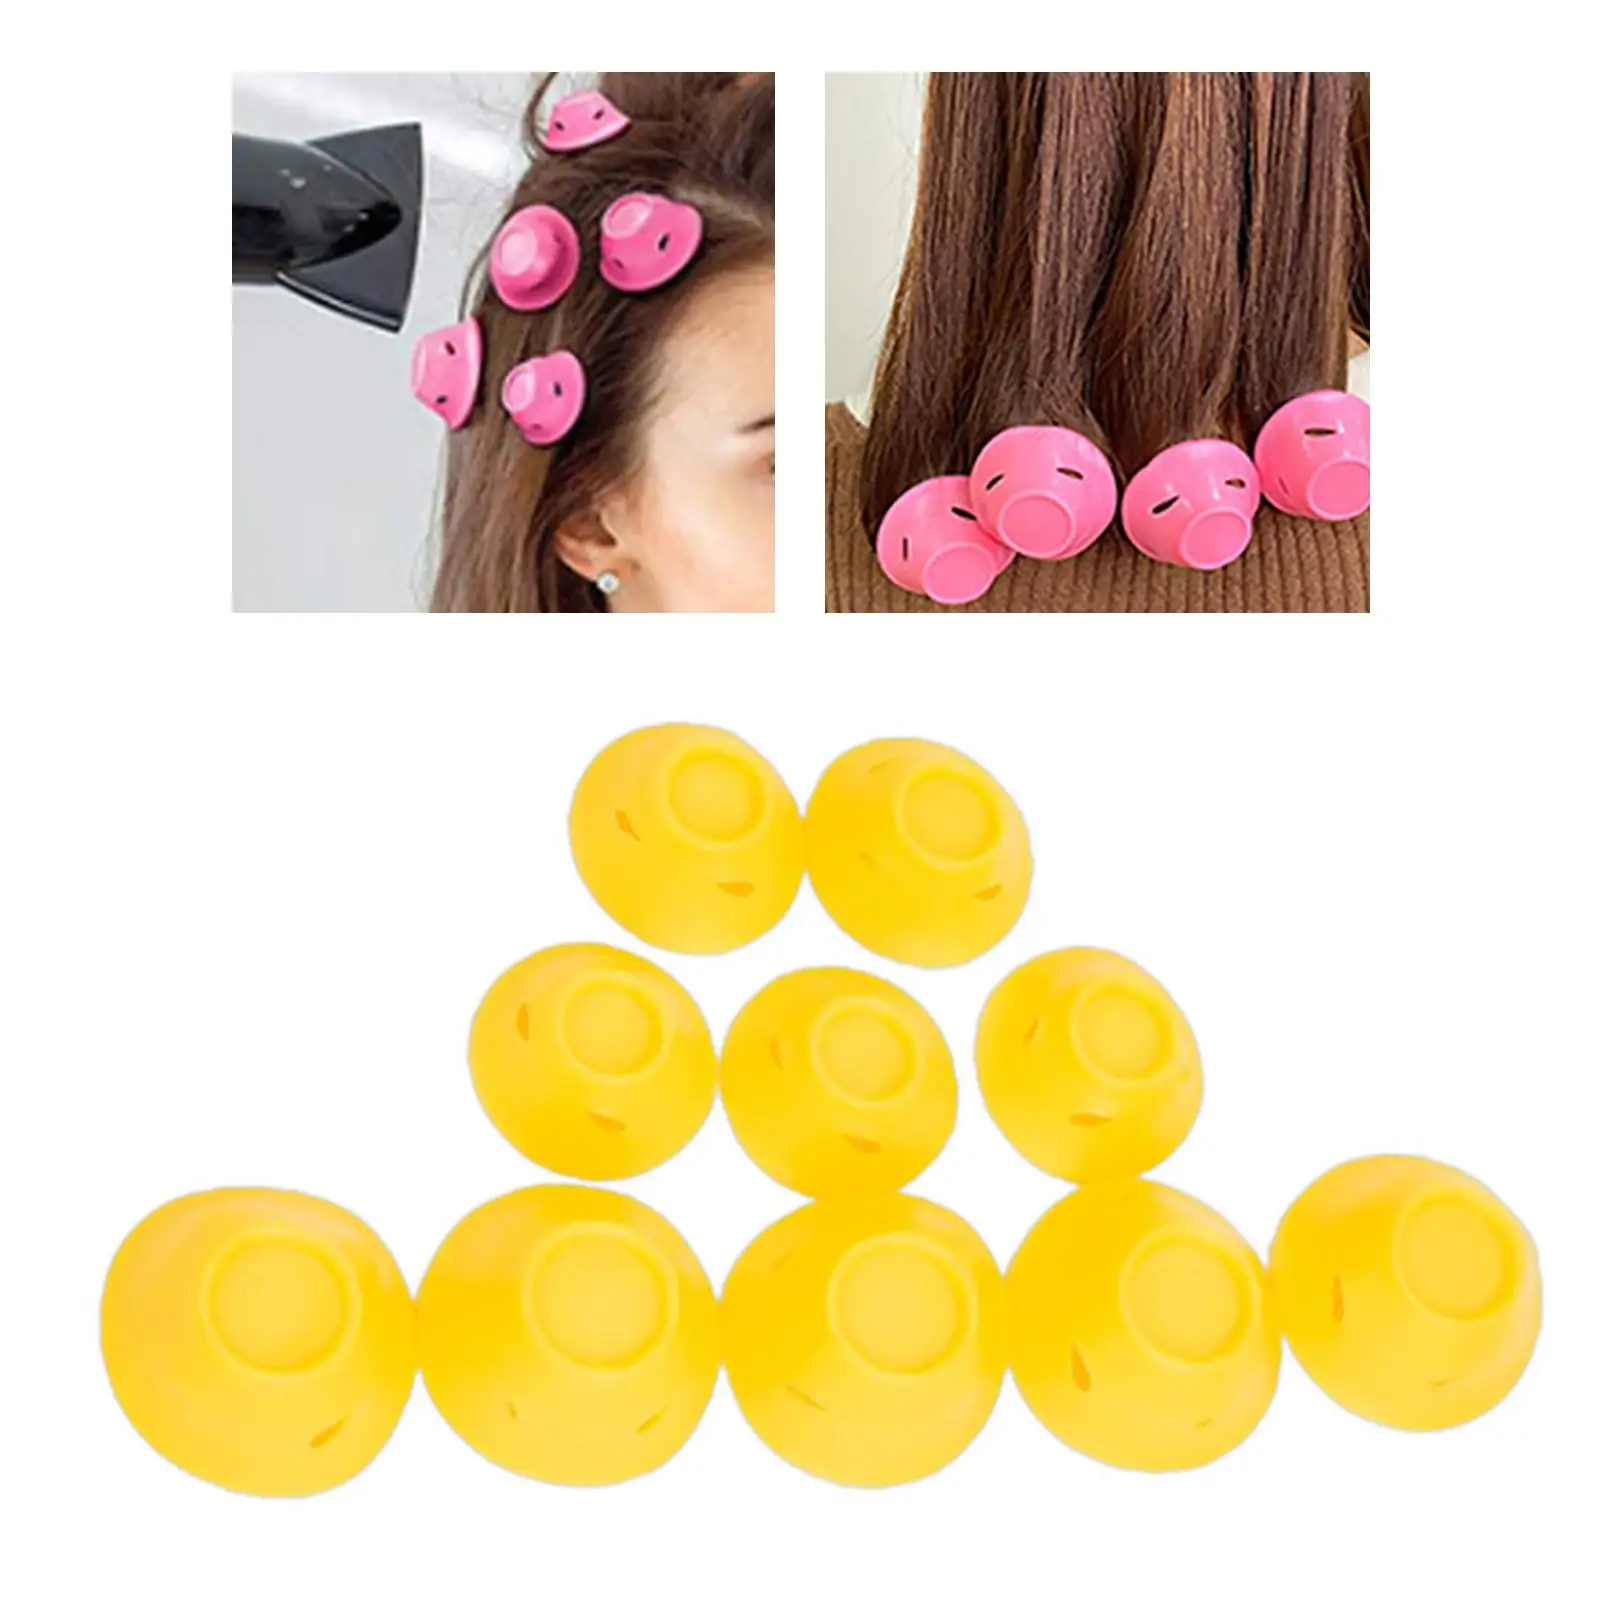 10x Silicone Hair Rollers Portable Hairdressing Tools Barber Curling Rods Headband Self Gripping Household Sleeping Curlers